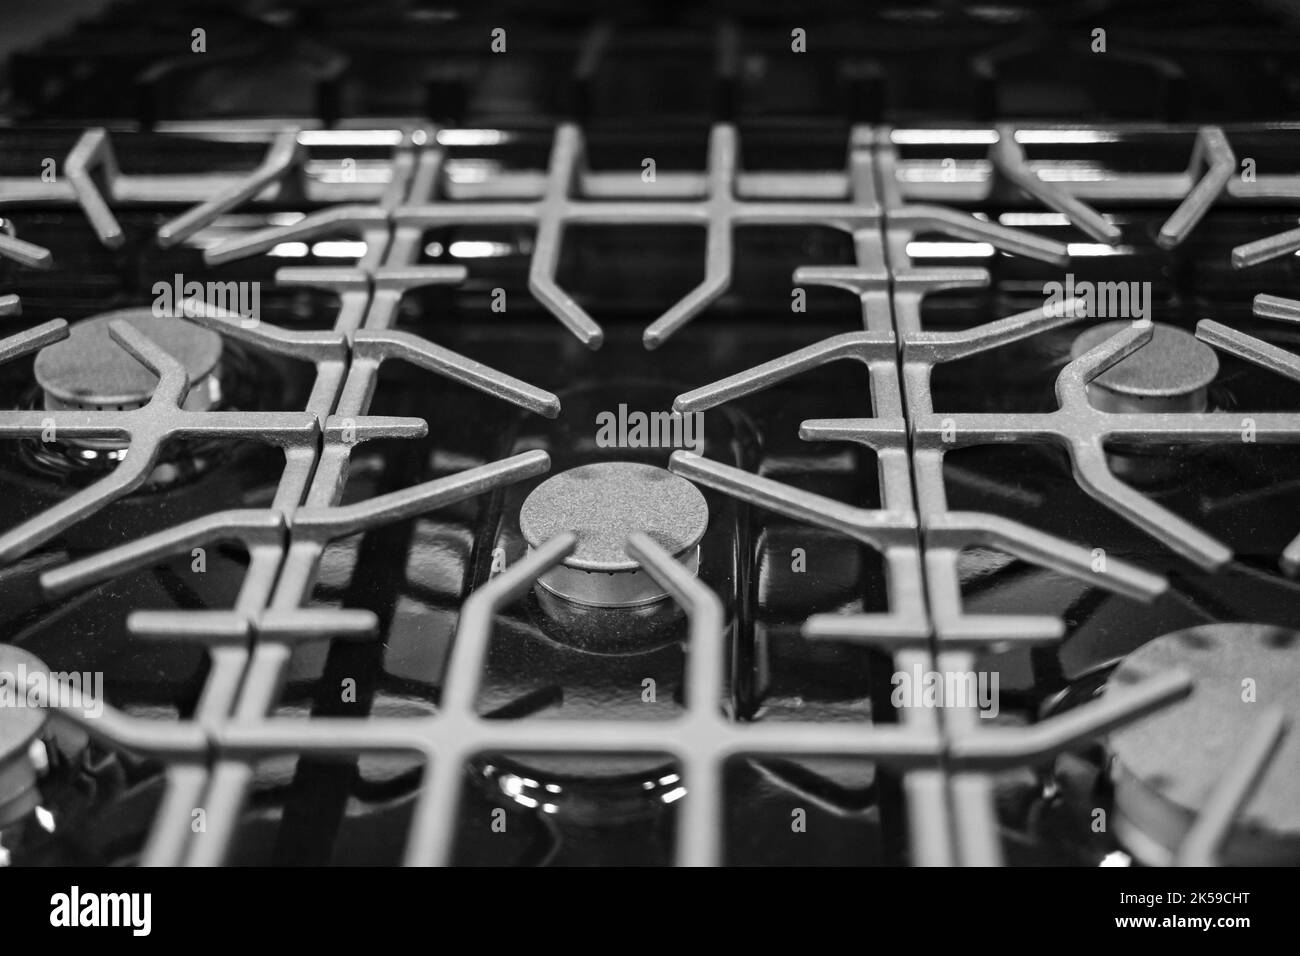 Kitchen surface in stainless steel with cast iron grill. View from above. Stove hob cooking kitchen cooker metal burner gas kitchen electric hot cookt Stock Photo